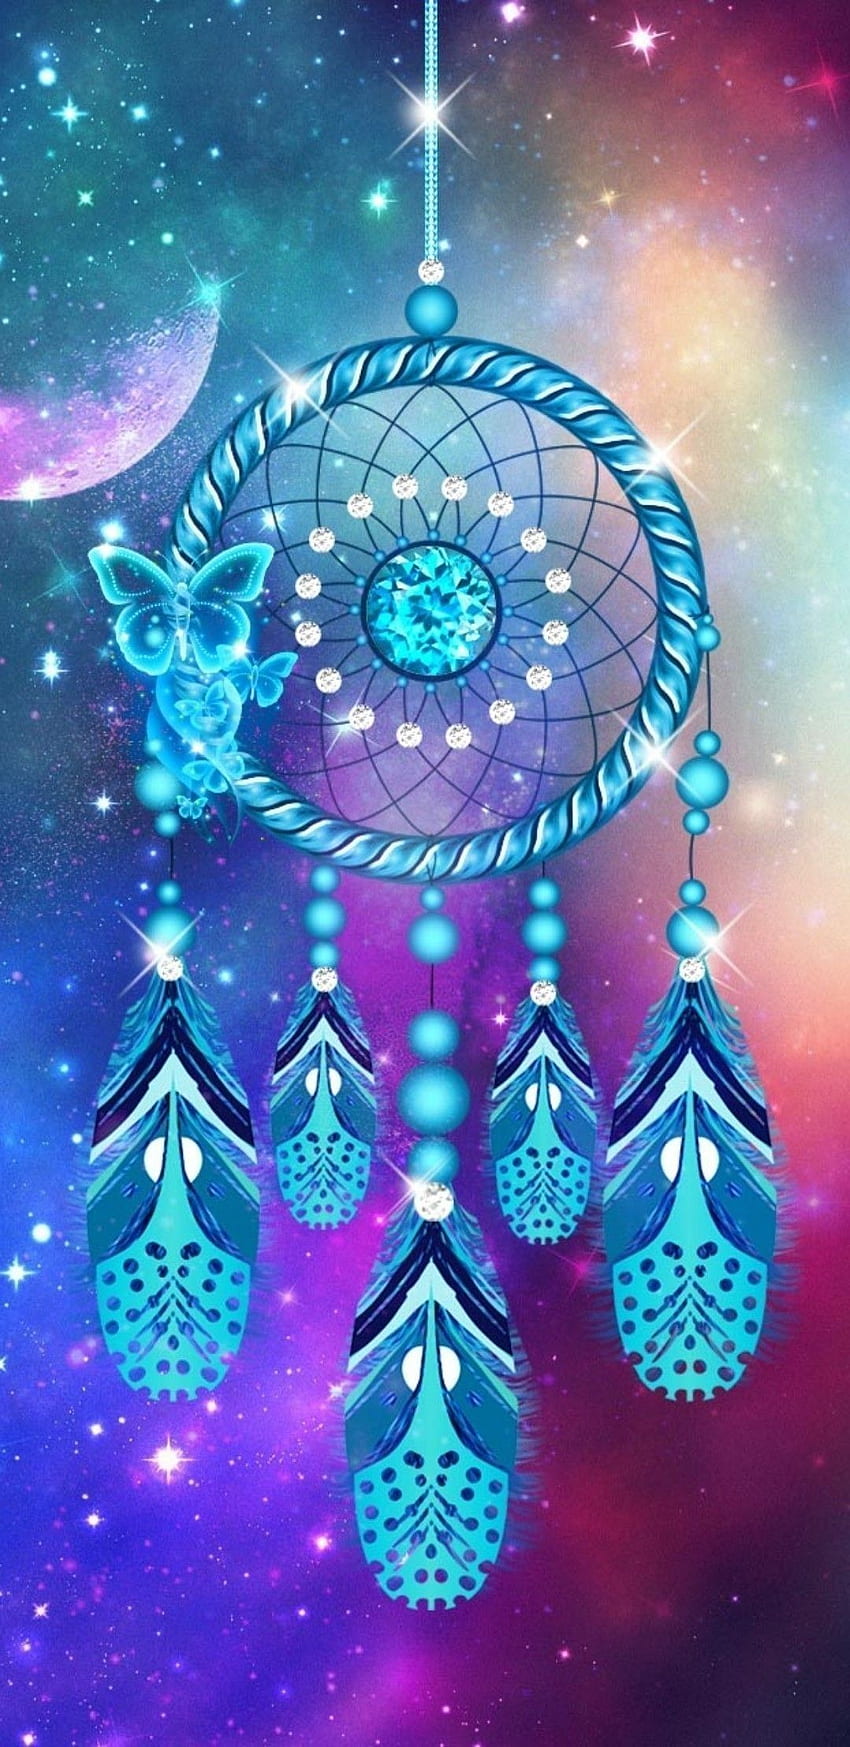 I CAN SEE YOUR DREAMS. Dreamcatcher , Dream catcher, Dream catcher iphone, Cool Dream Catcher HD phone wallpaper